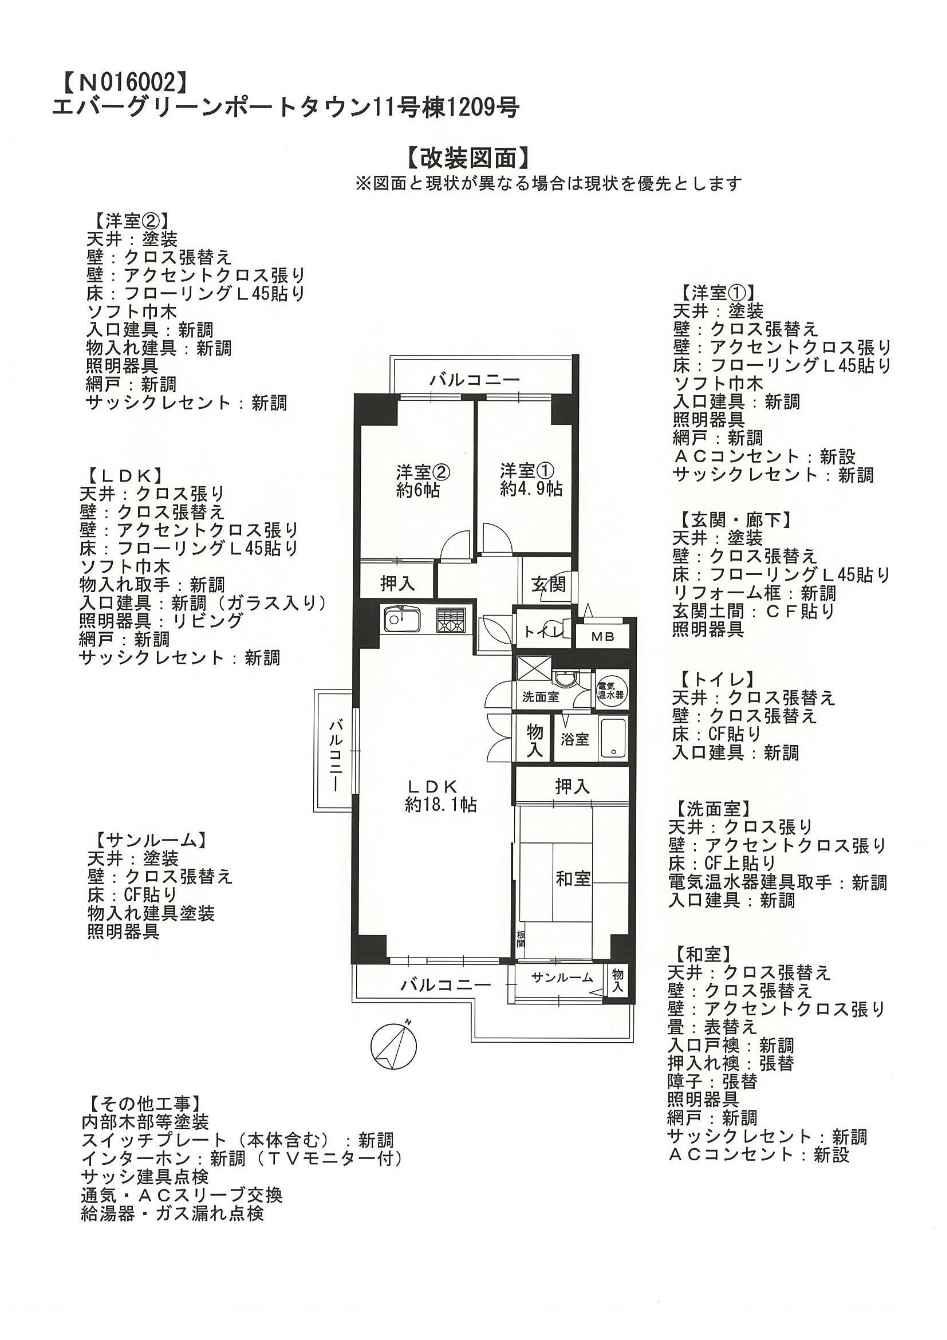 Floor plan. 3LDK, Price 13.8 million yen, Occupied area 80.15 sq m , Balcony area 15.36 sq m renovated for, It is ready-to-move-in. Please check once by all means.